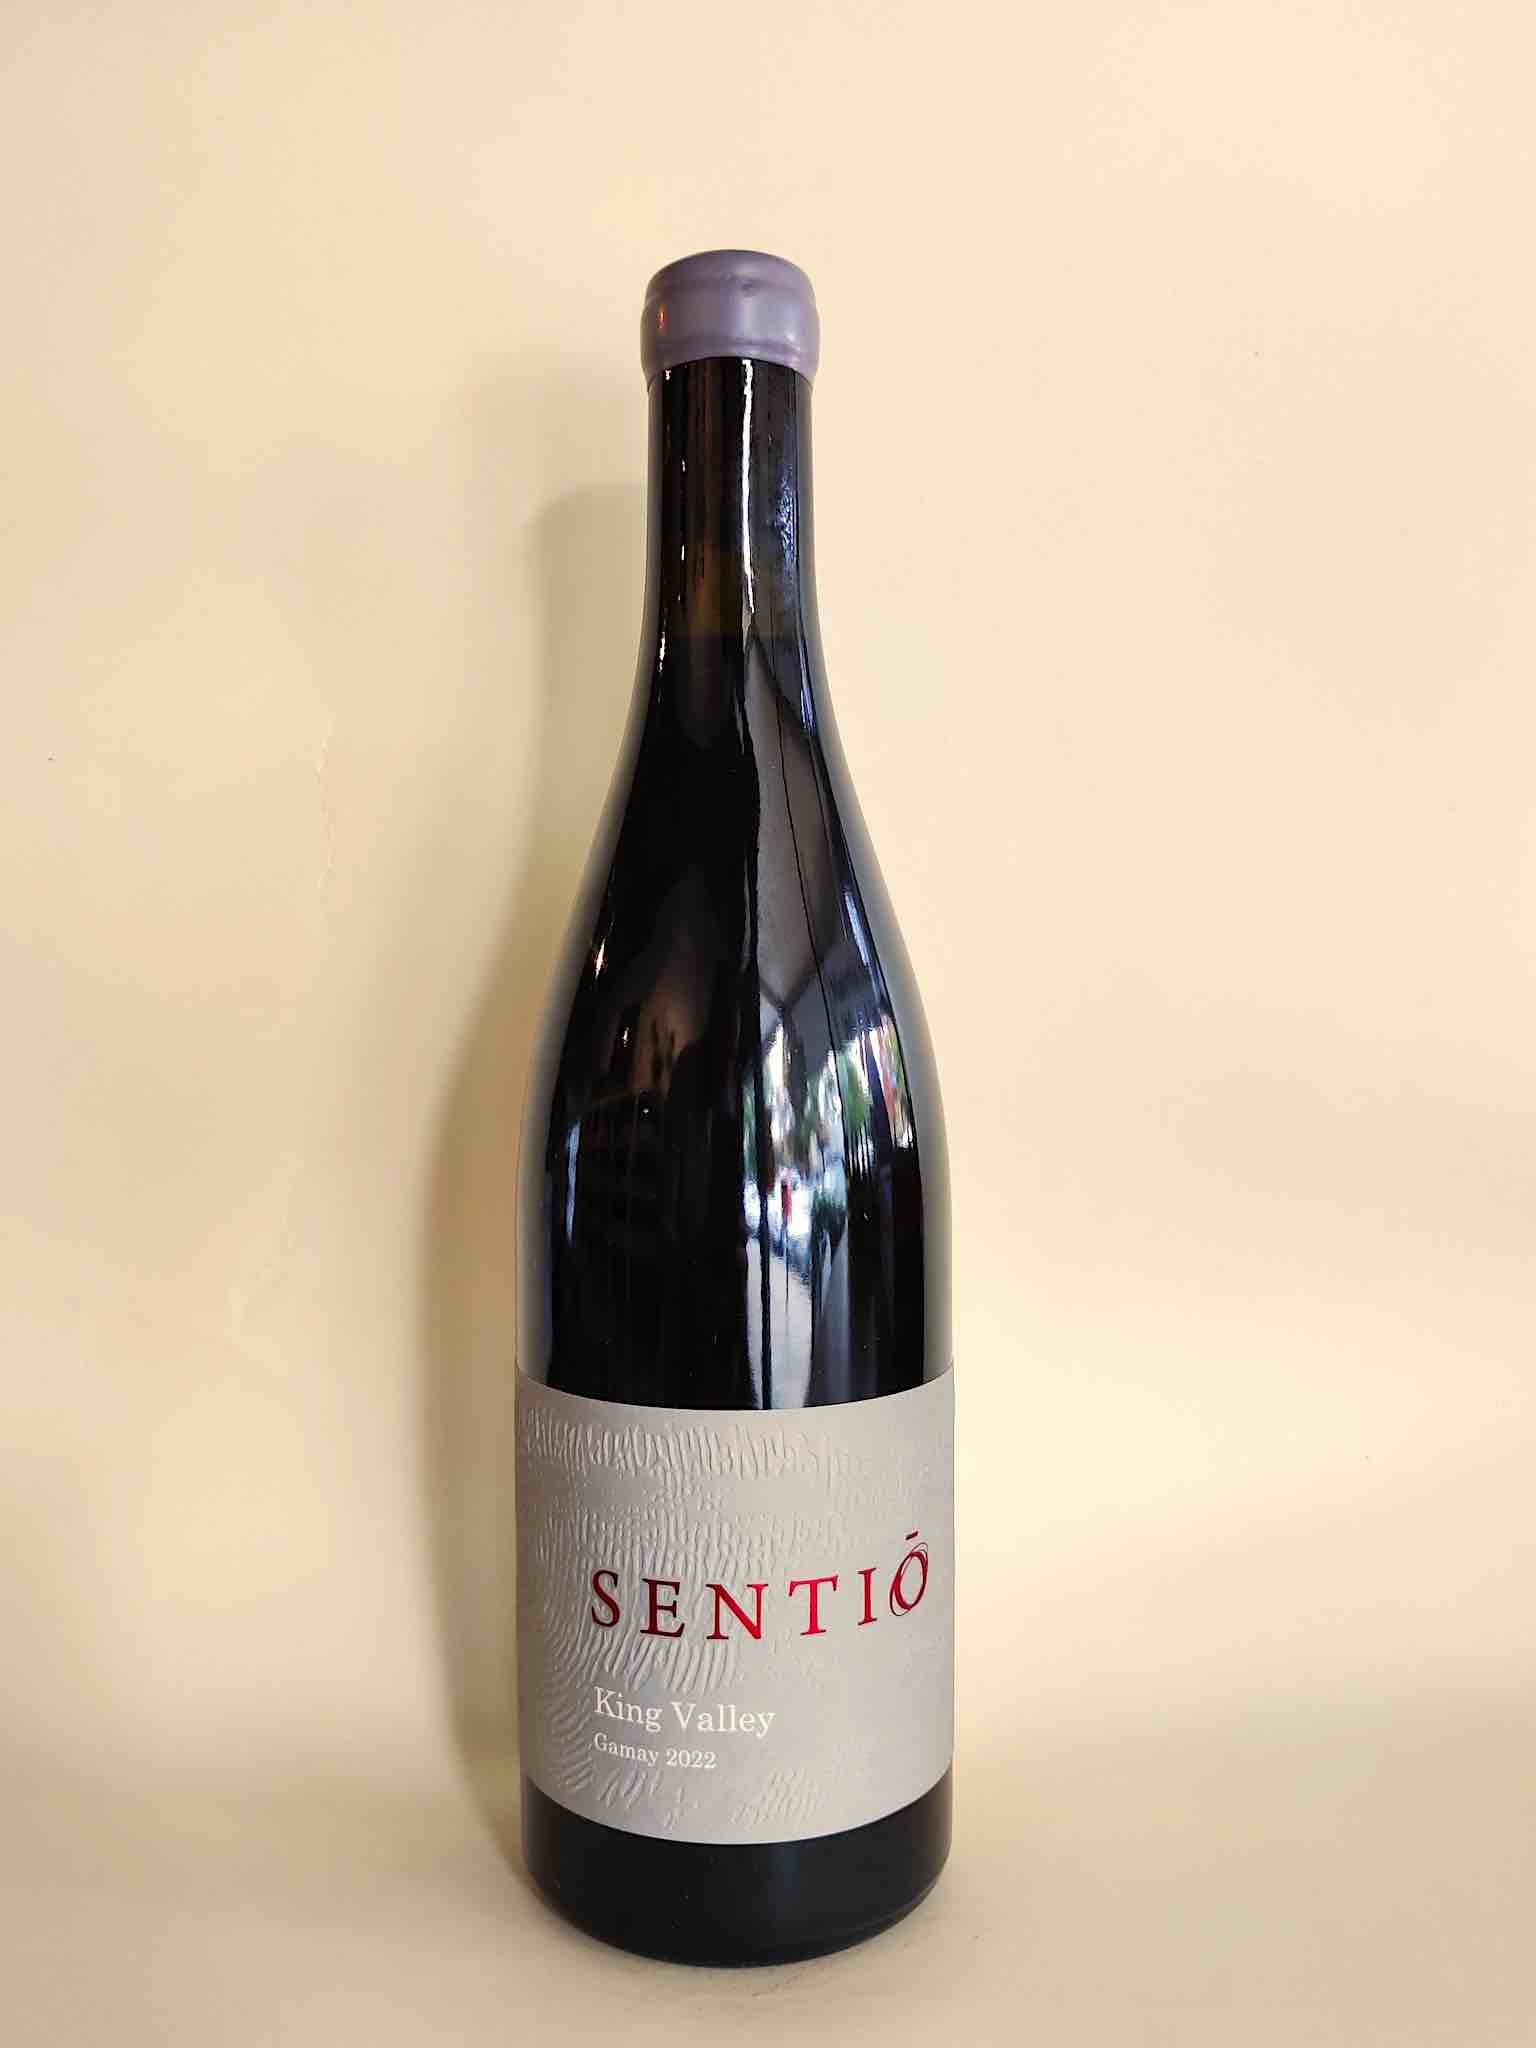 A bottle of Sentio Wines Gamay from King Valley, Victoria.